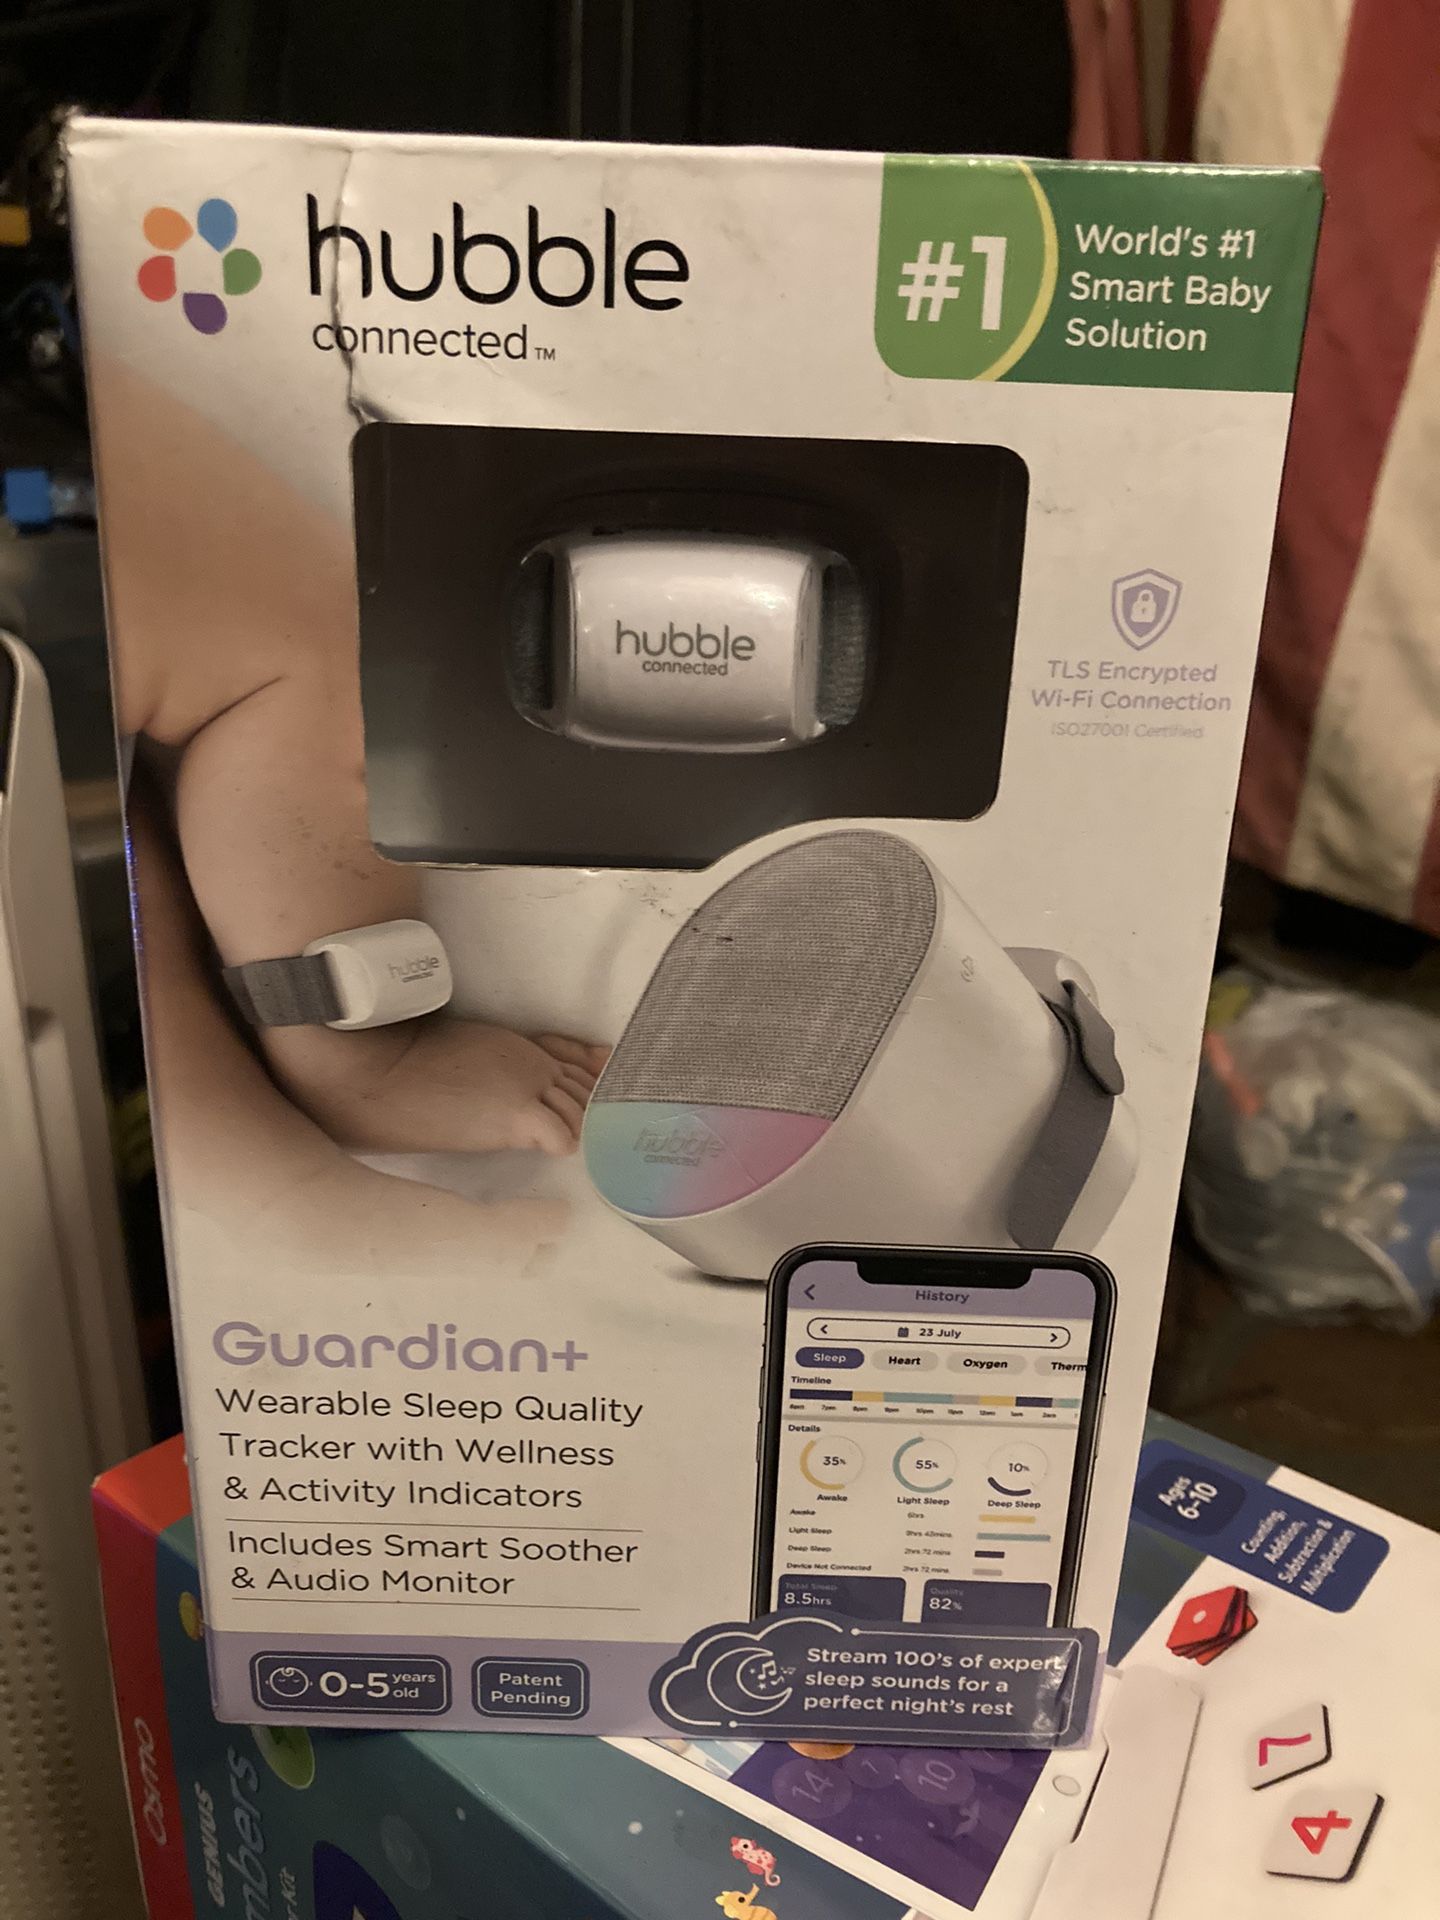 Hubble Guardian plus baby monitor with tons of functions